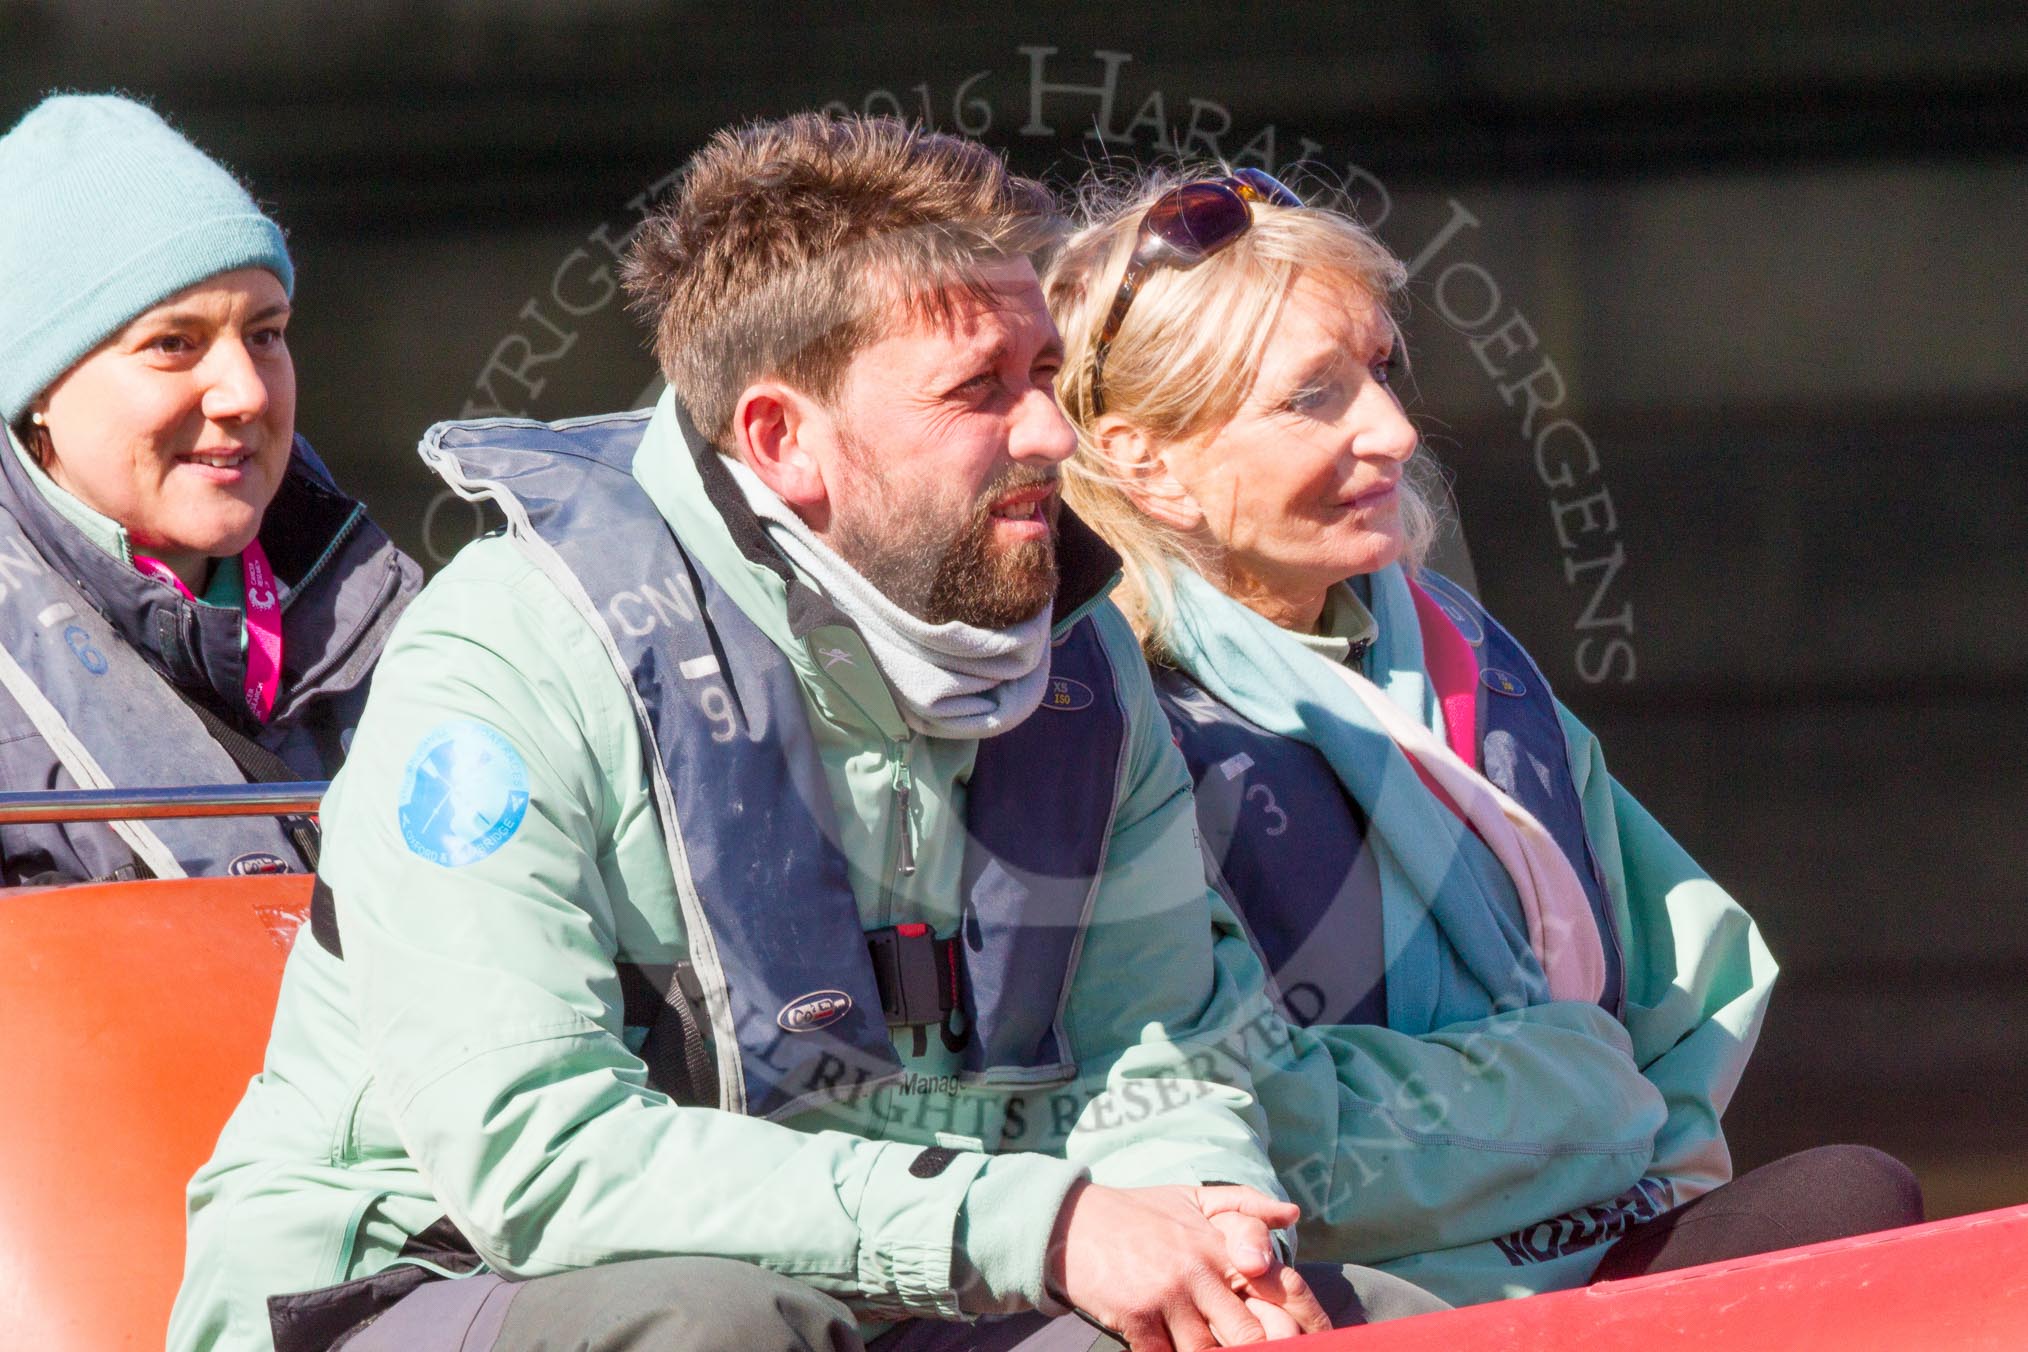 The Boat Race season 2016 -  The Cancer Research Women's Boat Race.
River Thames between Putney Bridge and Mortlake,
London SW15,

United Kingdom,
on 27 March 2016 at 13:46, image #126